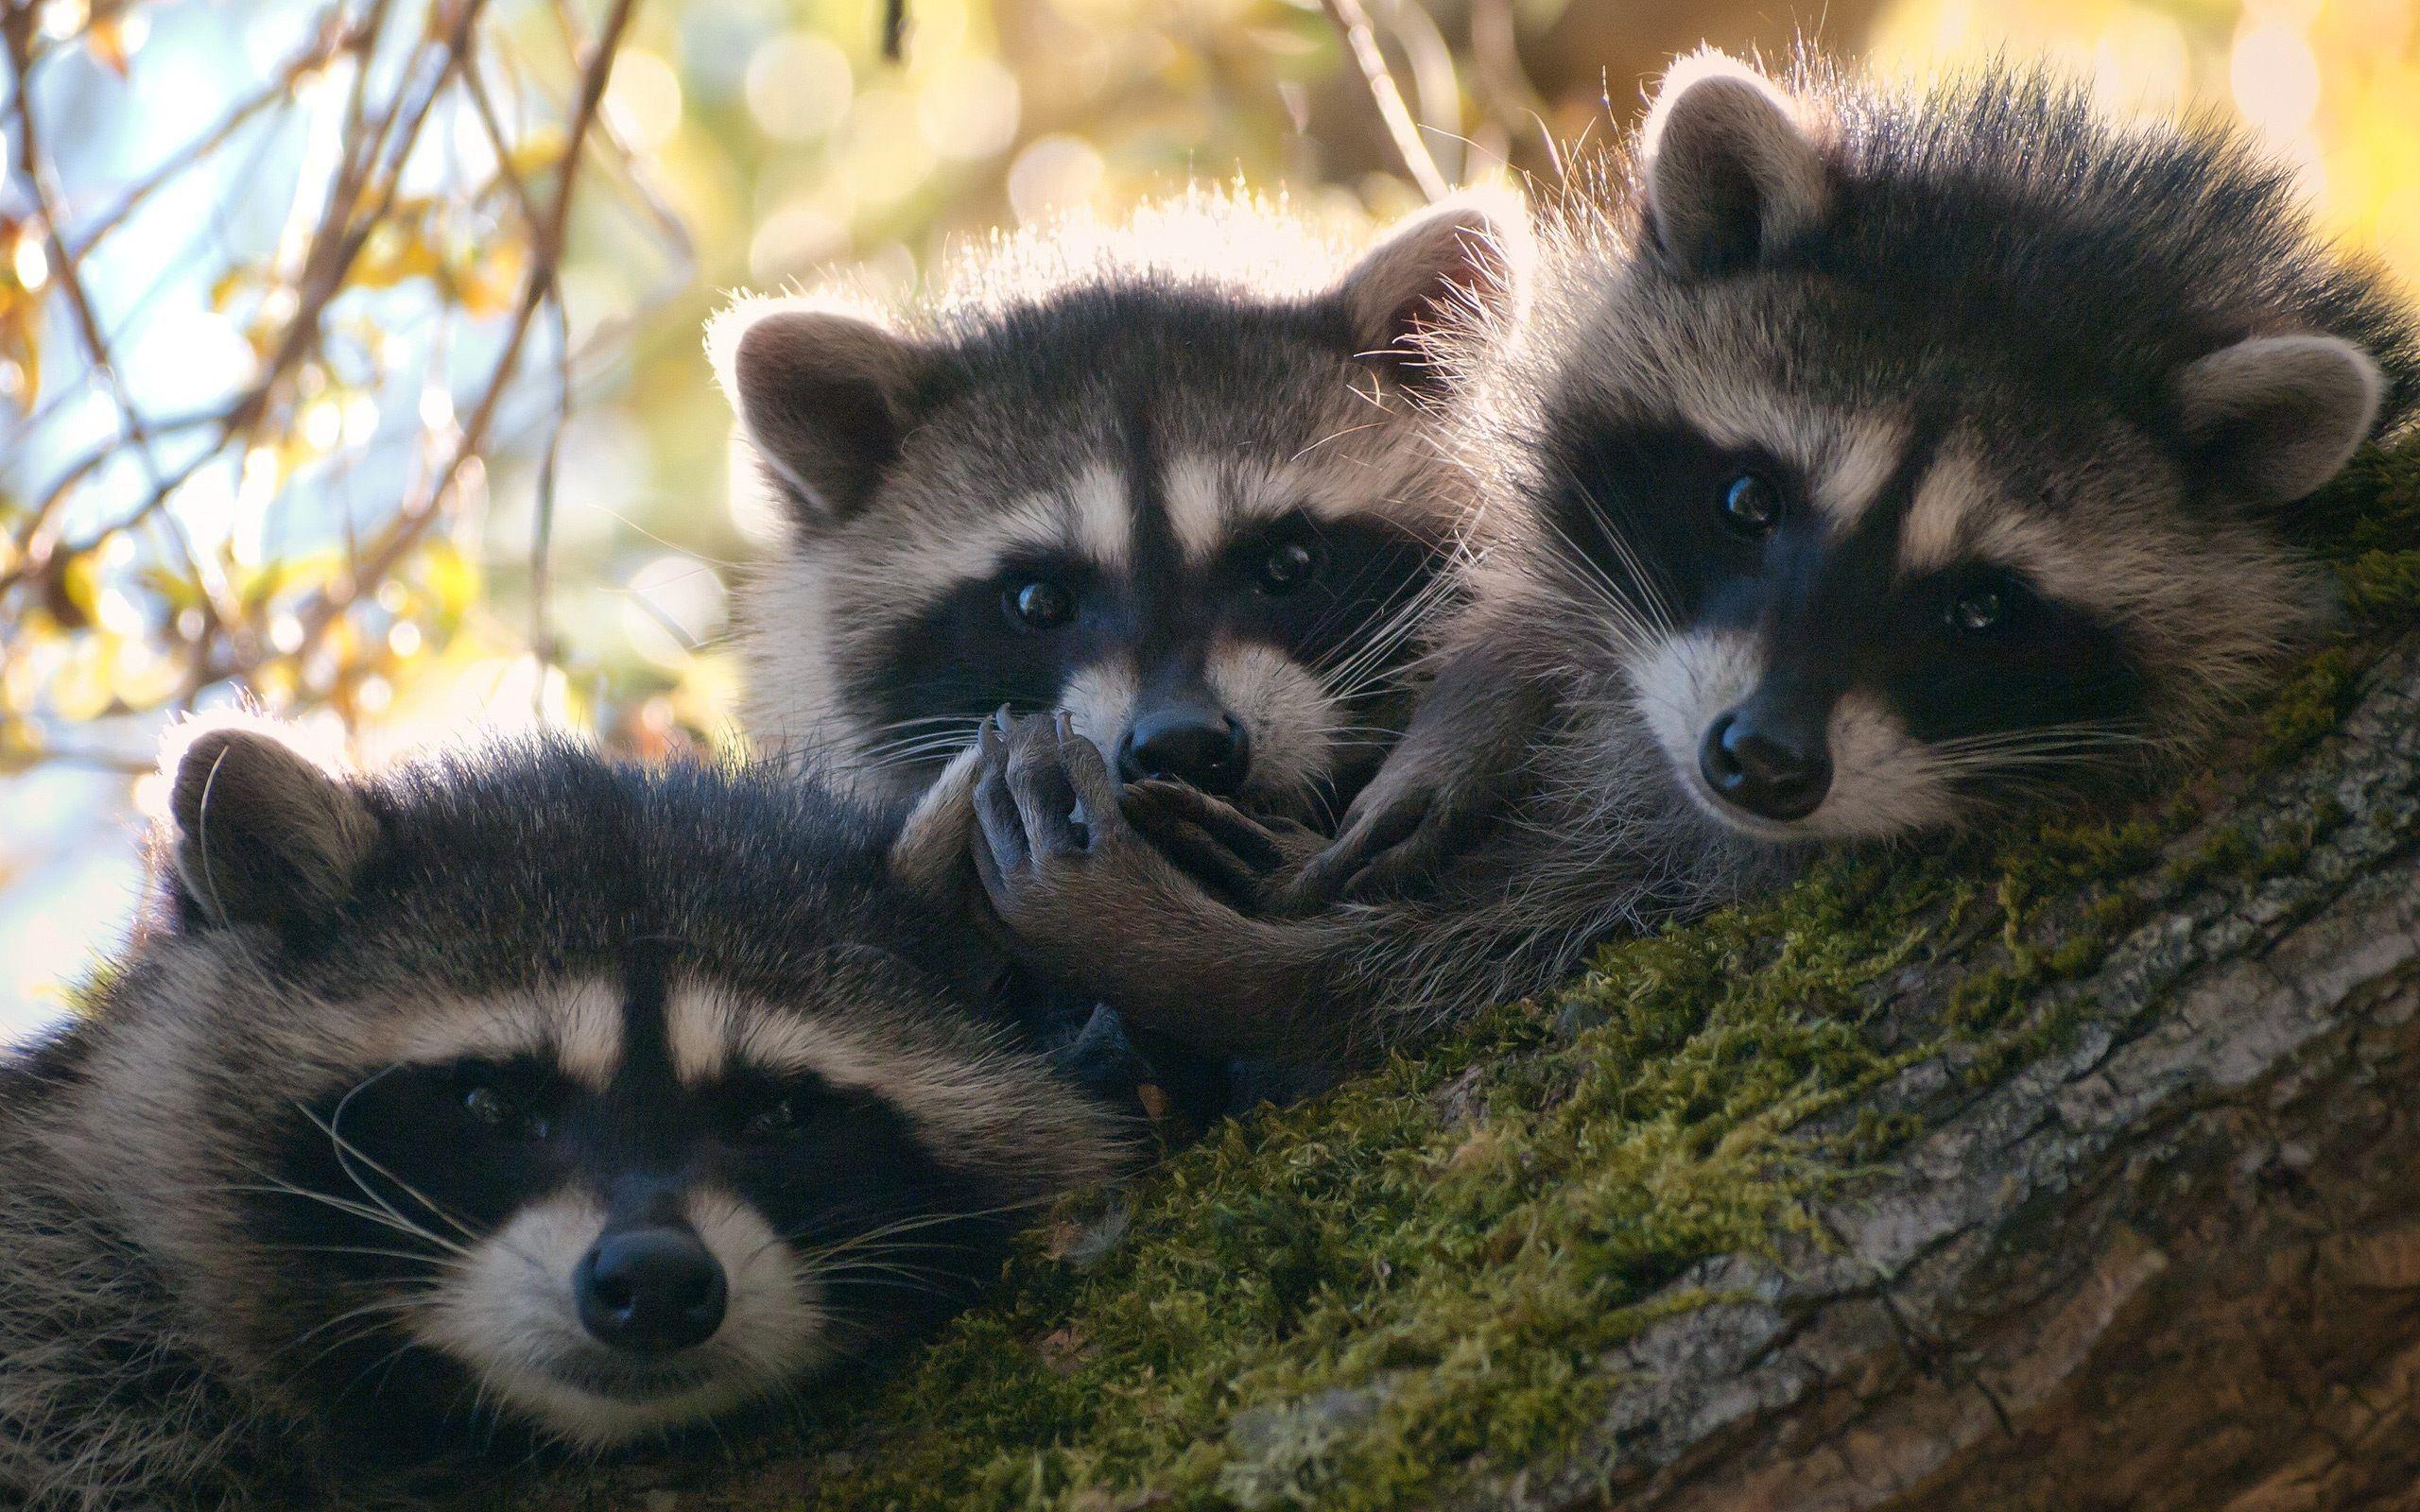 Baby Raccoons Wallpaper free download in high quality widescreen